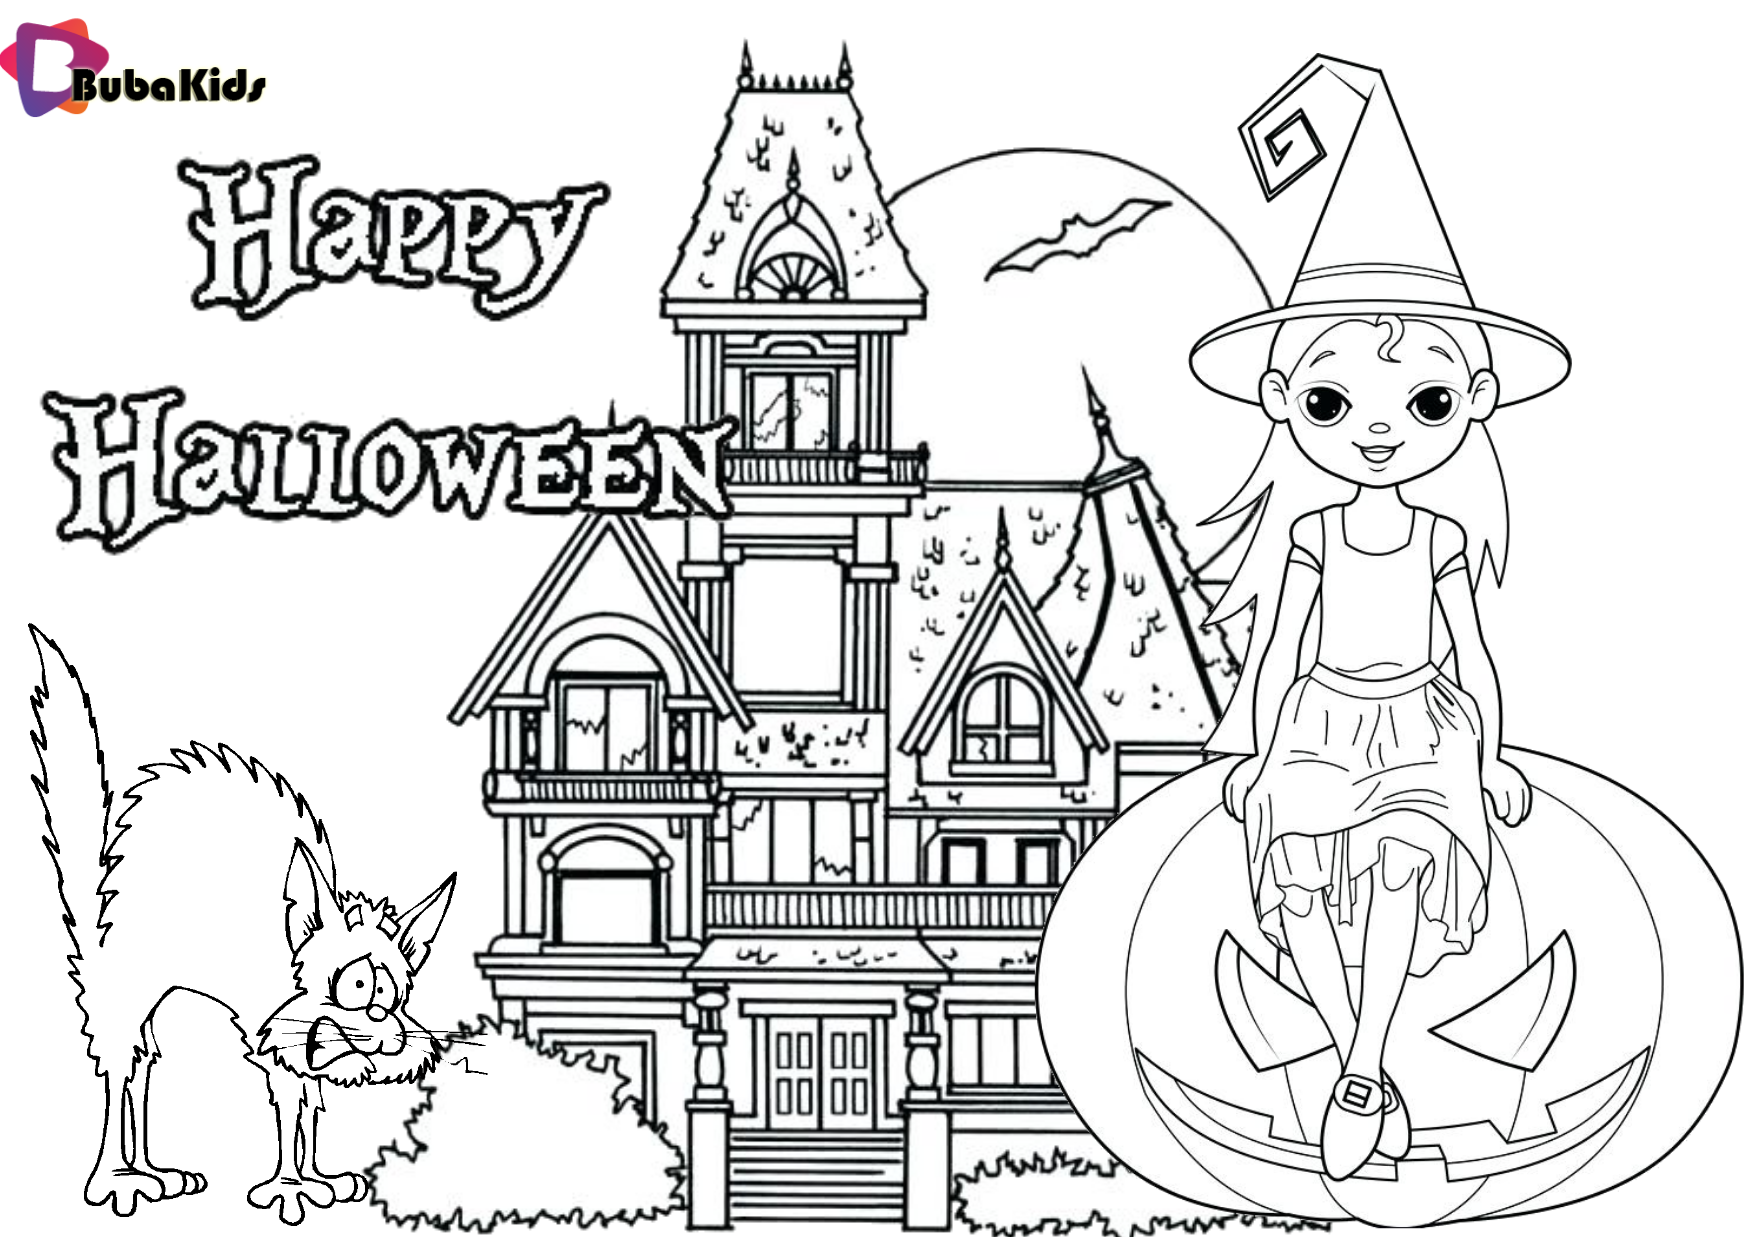 Little witch halloween party costume. Printable Coloring page. Wallpaper